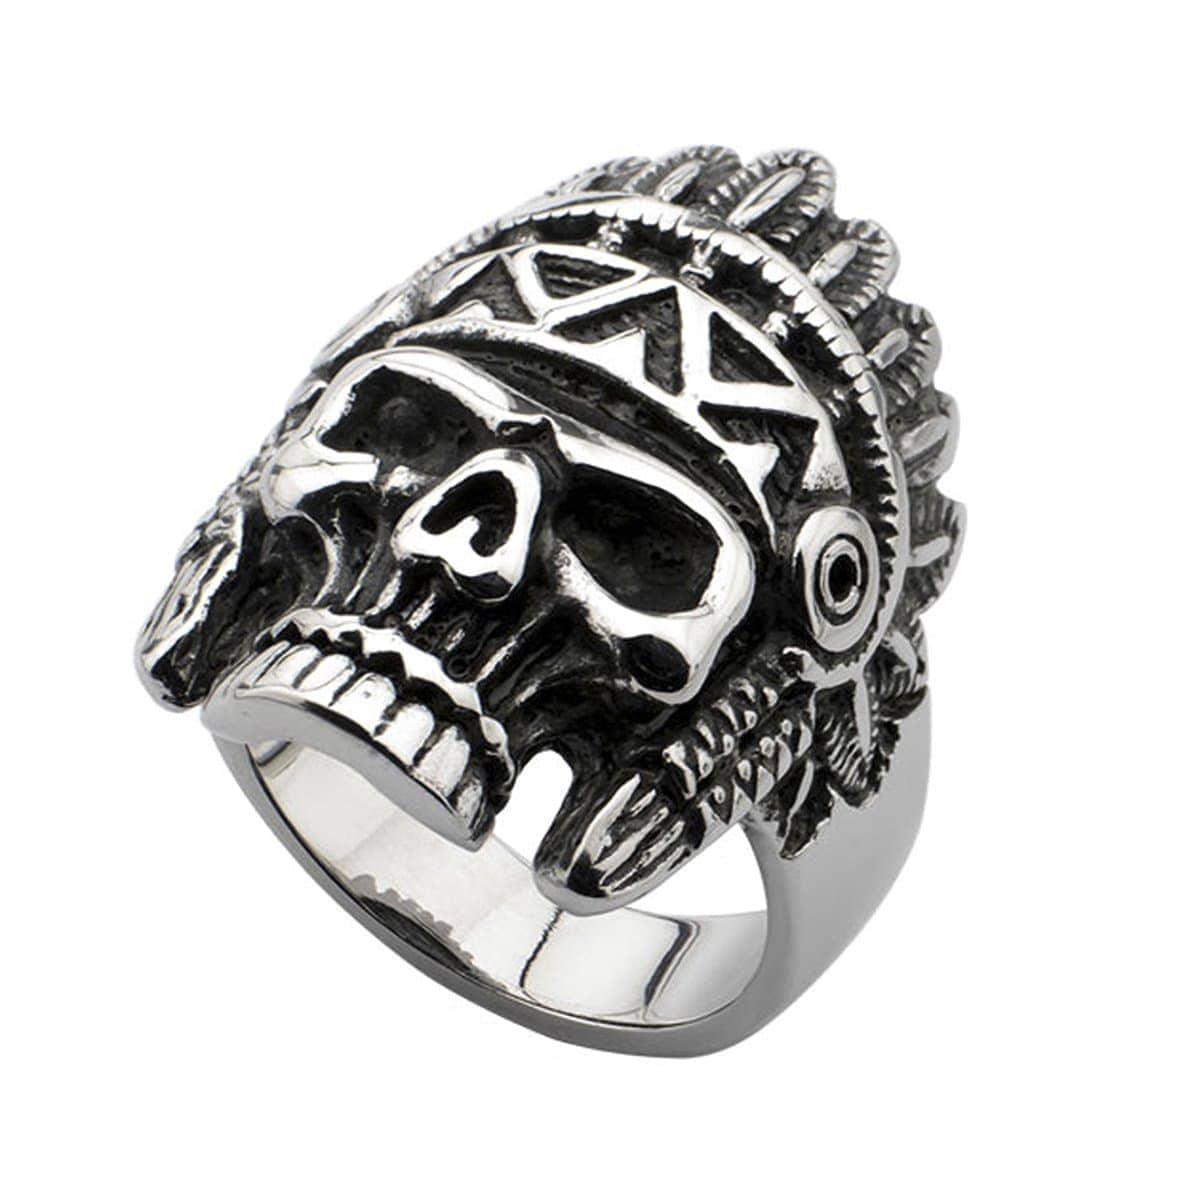 INOX JEWELRY Rings Antiqued Silver Tone Stainless Steel Tribal Chief Hallowed Jaw Skull Ring